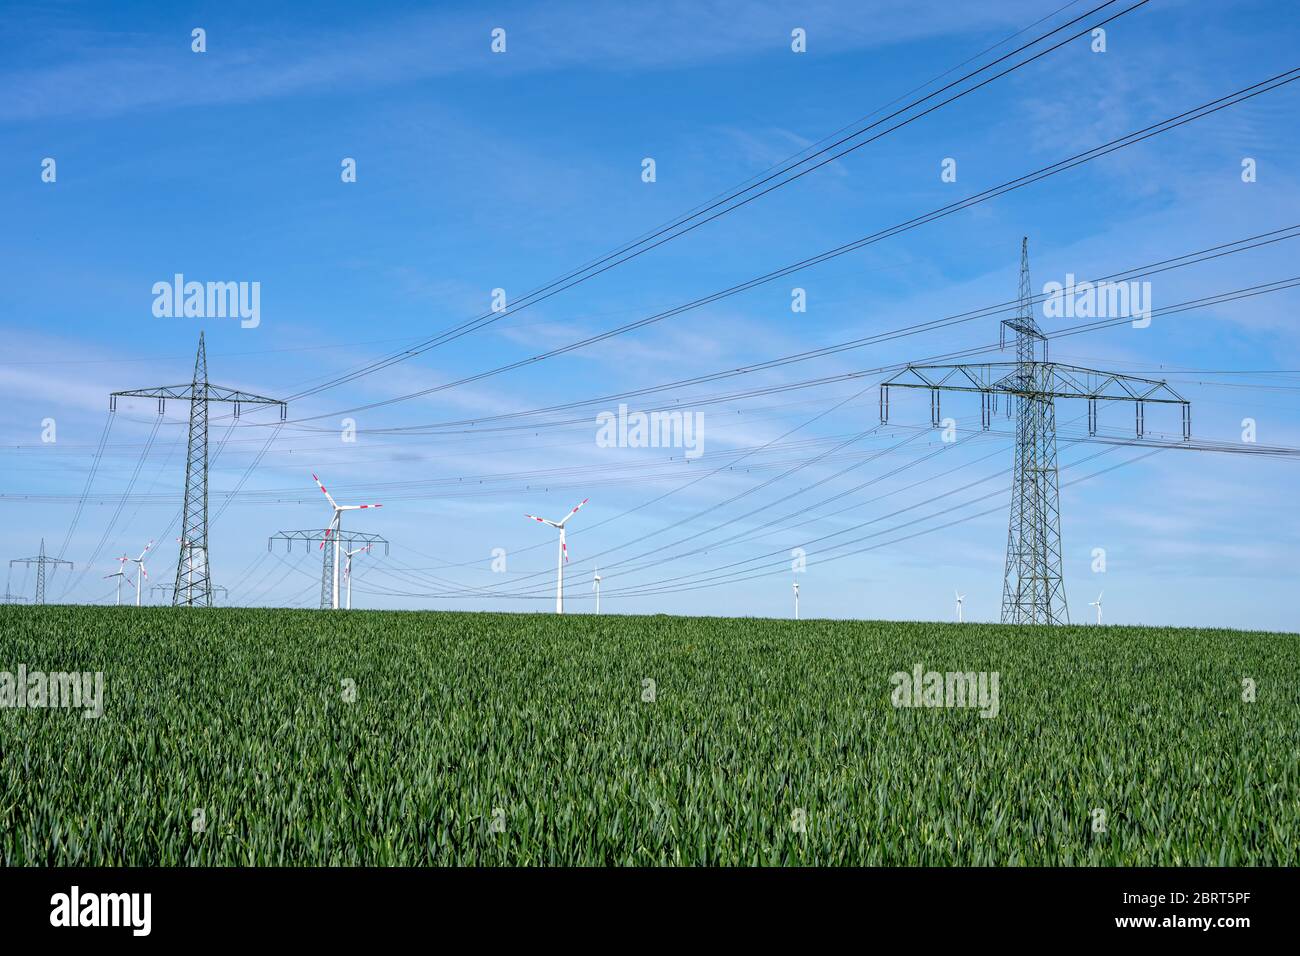 Overhead power lines in a cornfield seen in Germany Stock Photo